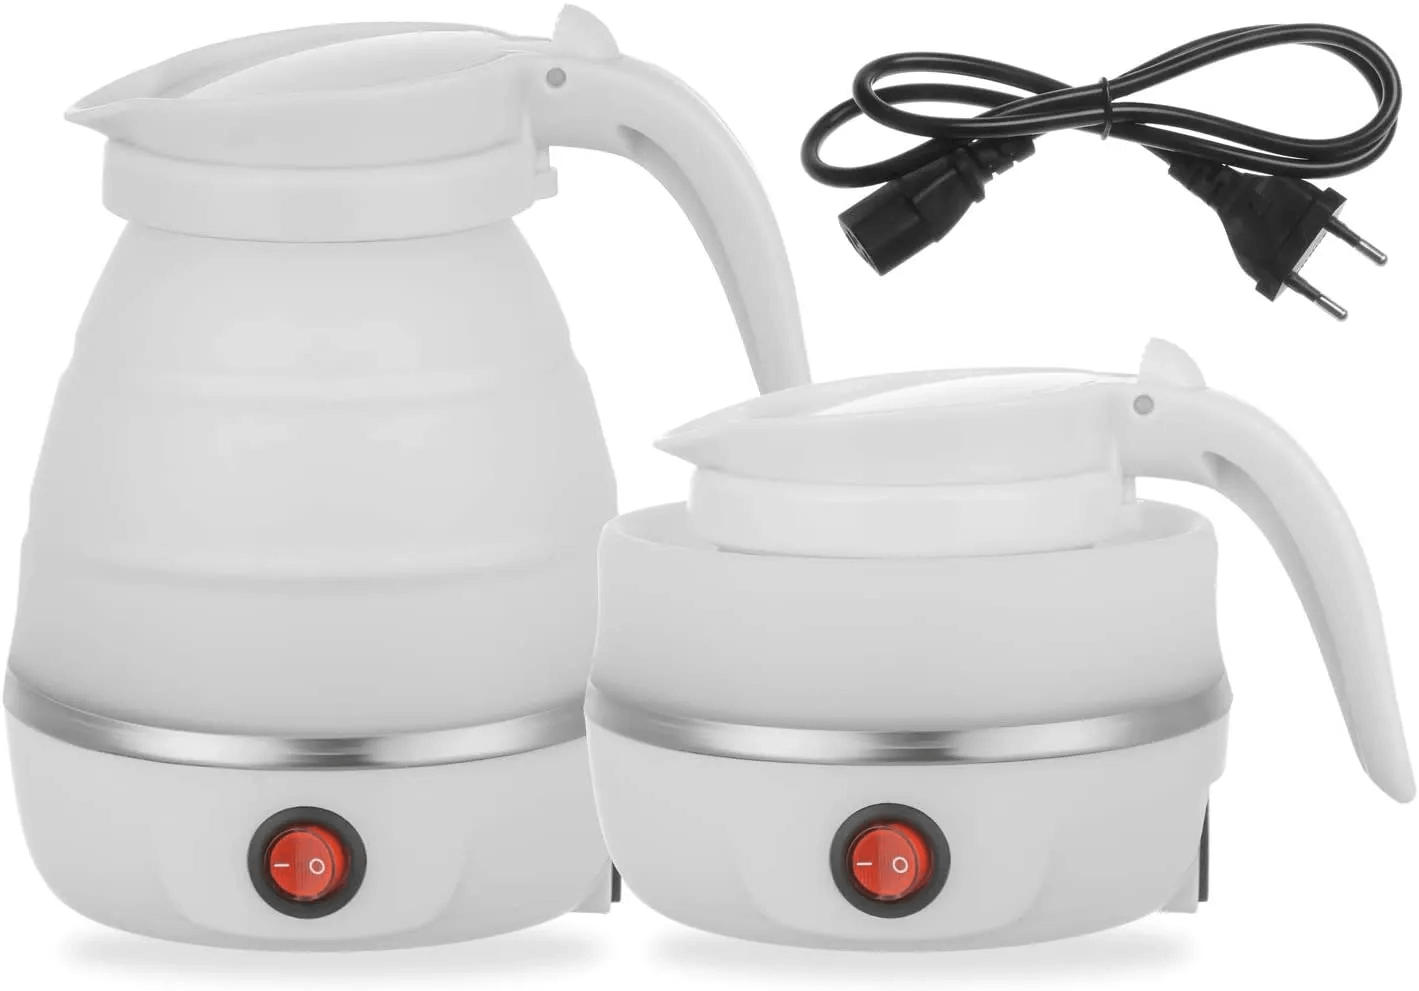 Electric Kettle 600ml Silicone Mini Small Electric Kettles 220V Travel Water Boiler Camping Kettle